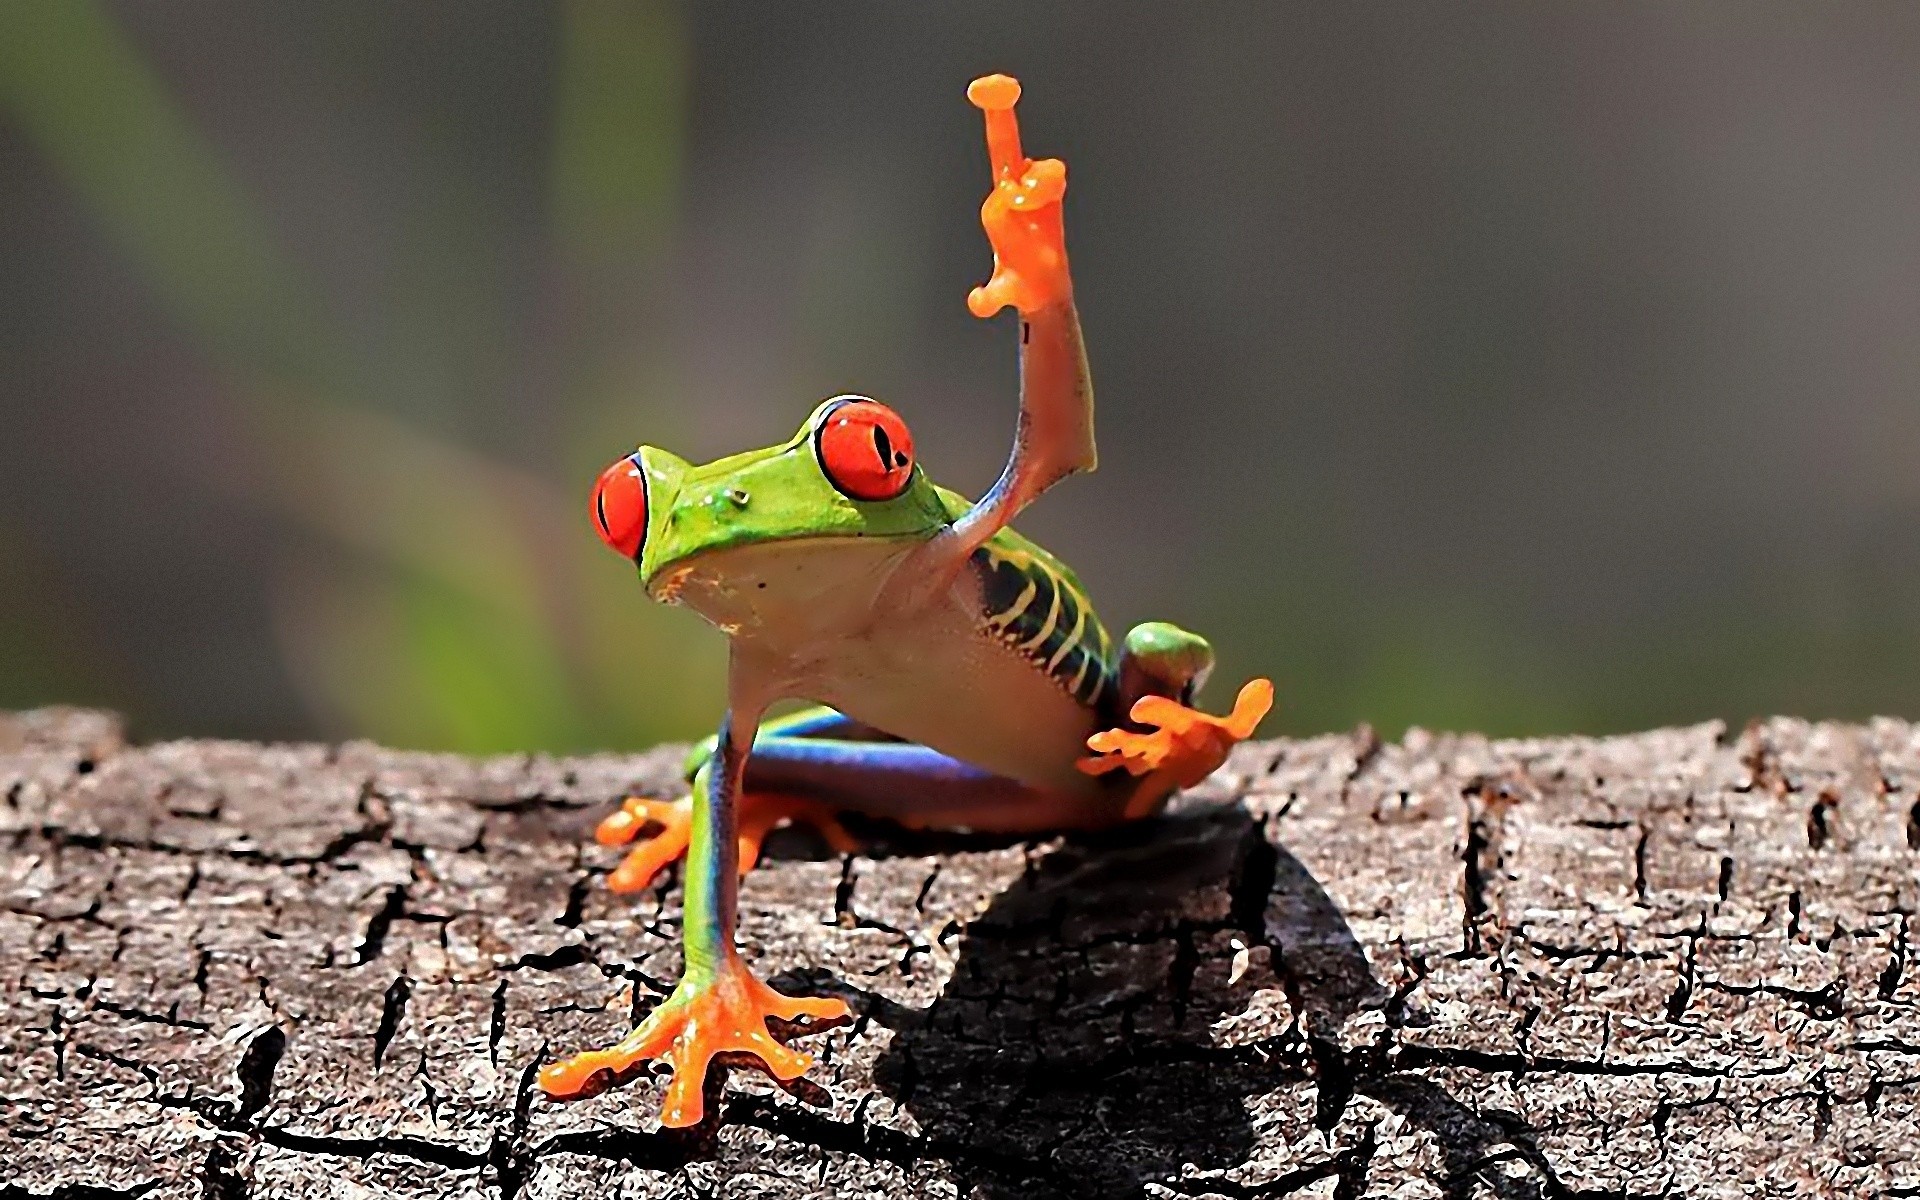 funny, frogs, animal, red eyed tree frog, cute, humor